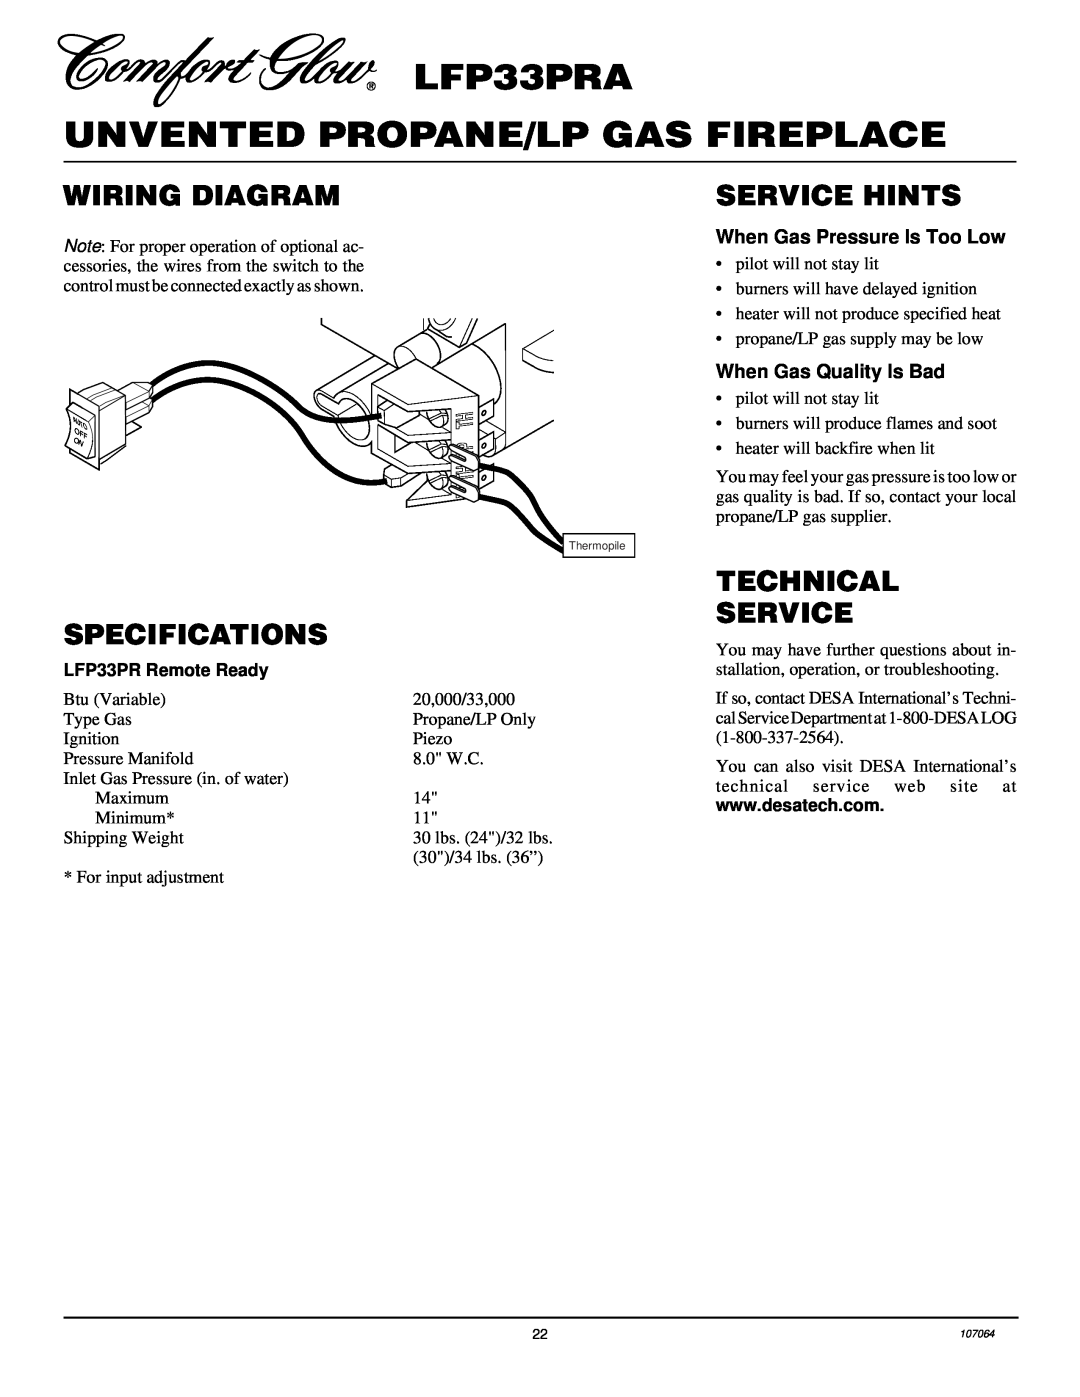 Desa LFP33PRA Wiring Diagram, Service Hints, Specifications, Technical Service, When Gas Pressure Is Too Low 